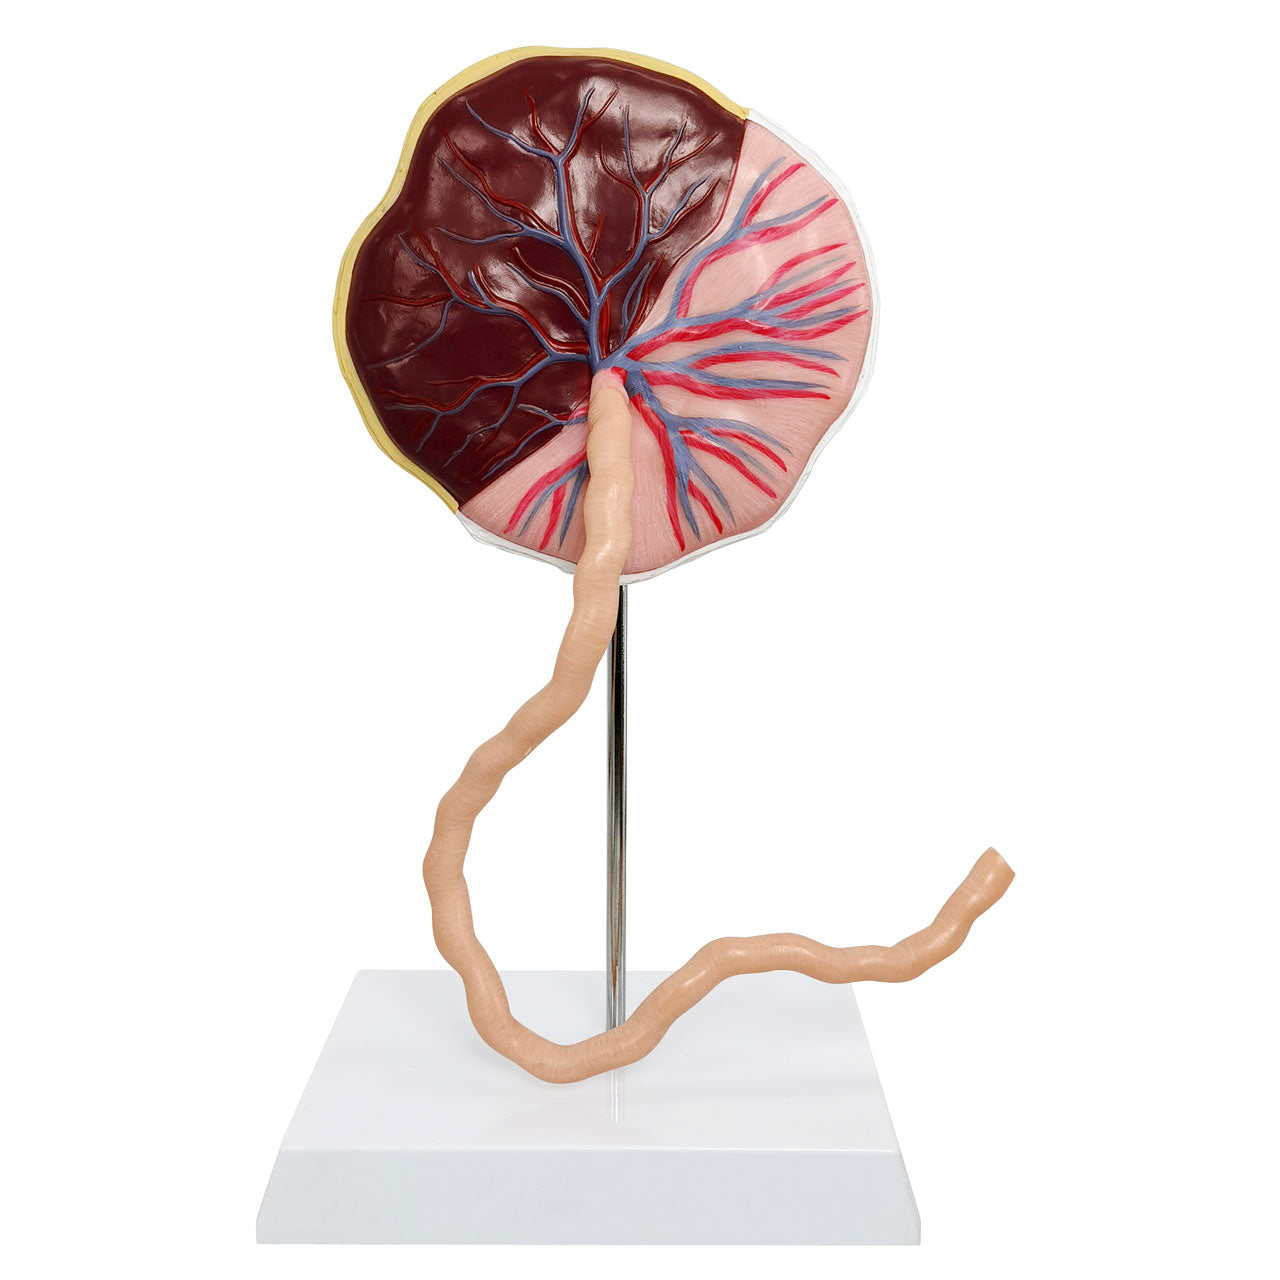 Evotech Scientific Placenta Model with Removable Umbilical Cord Anatomical Model